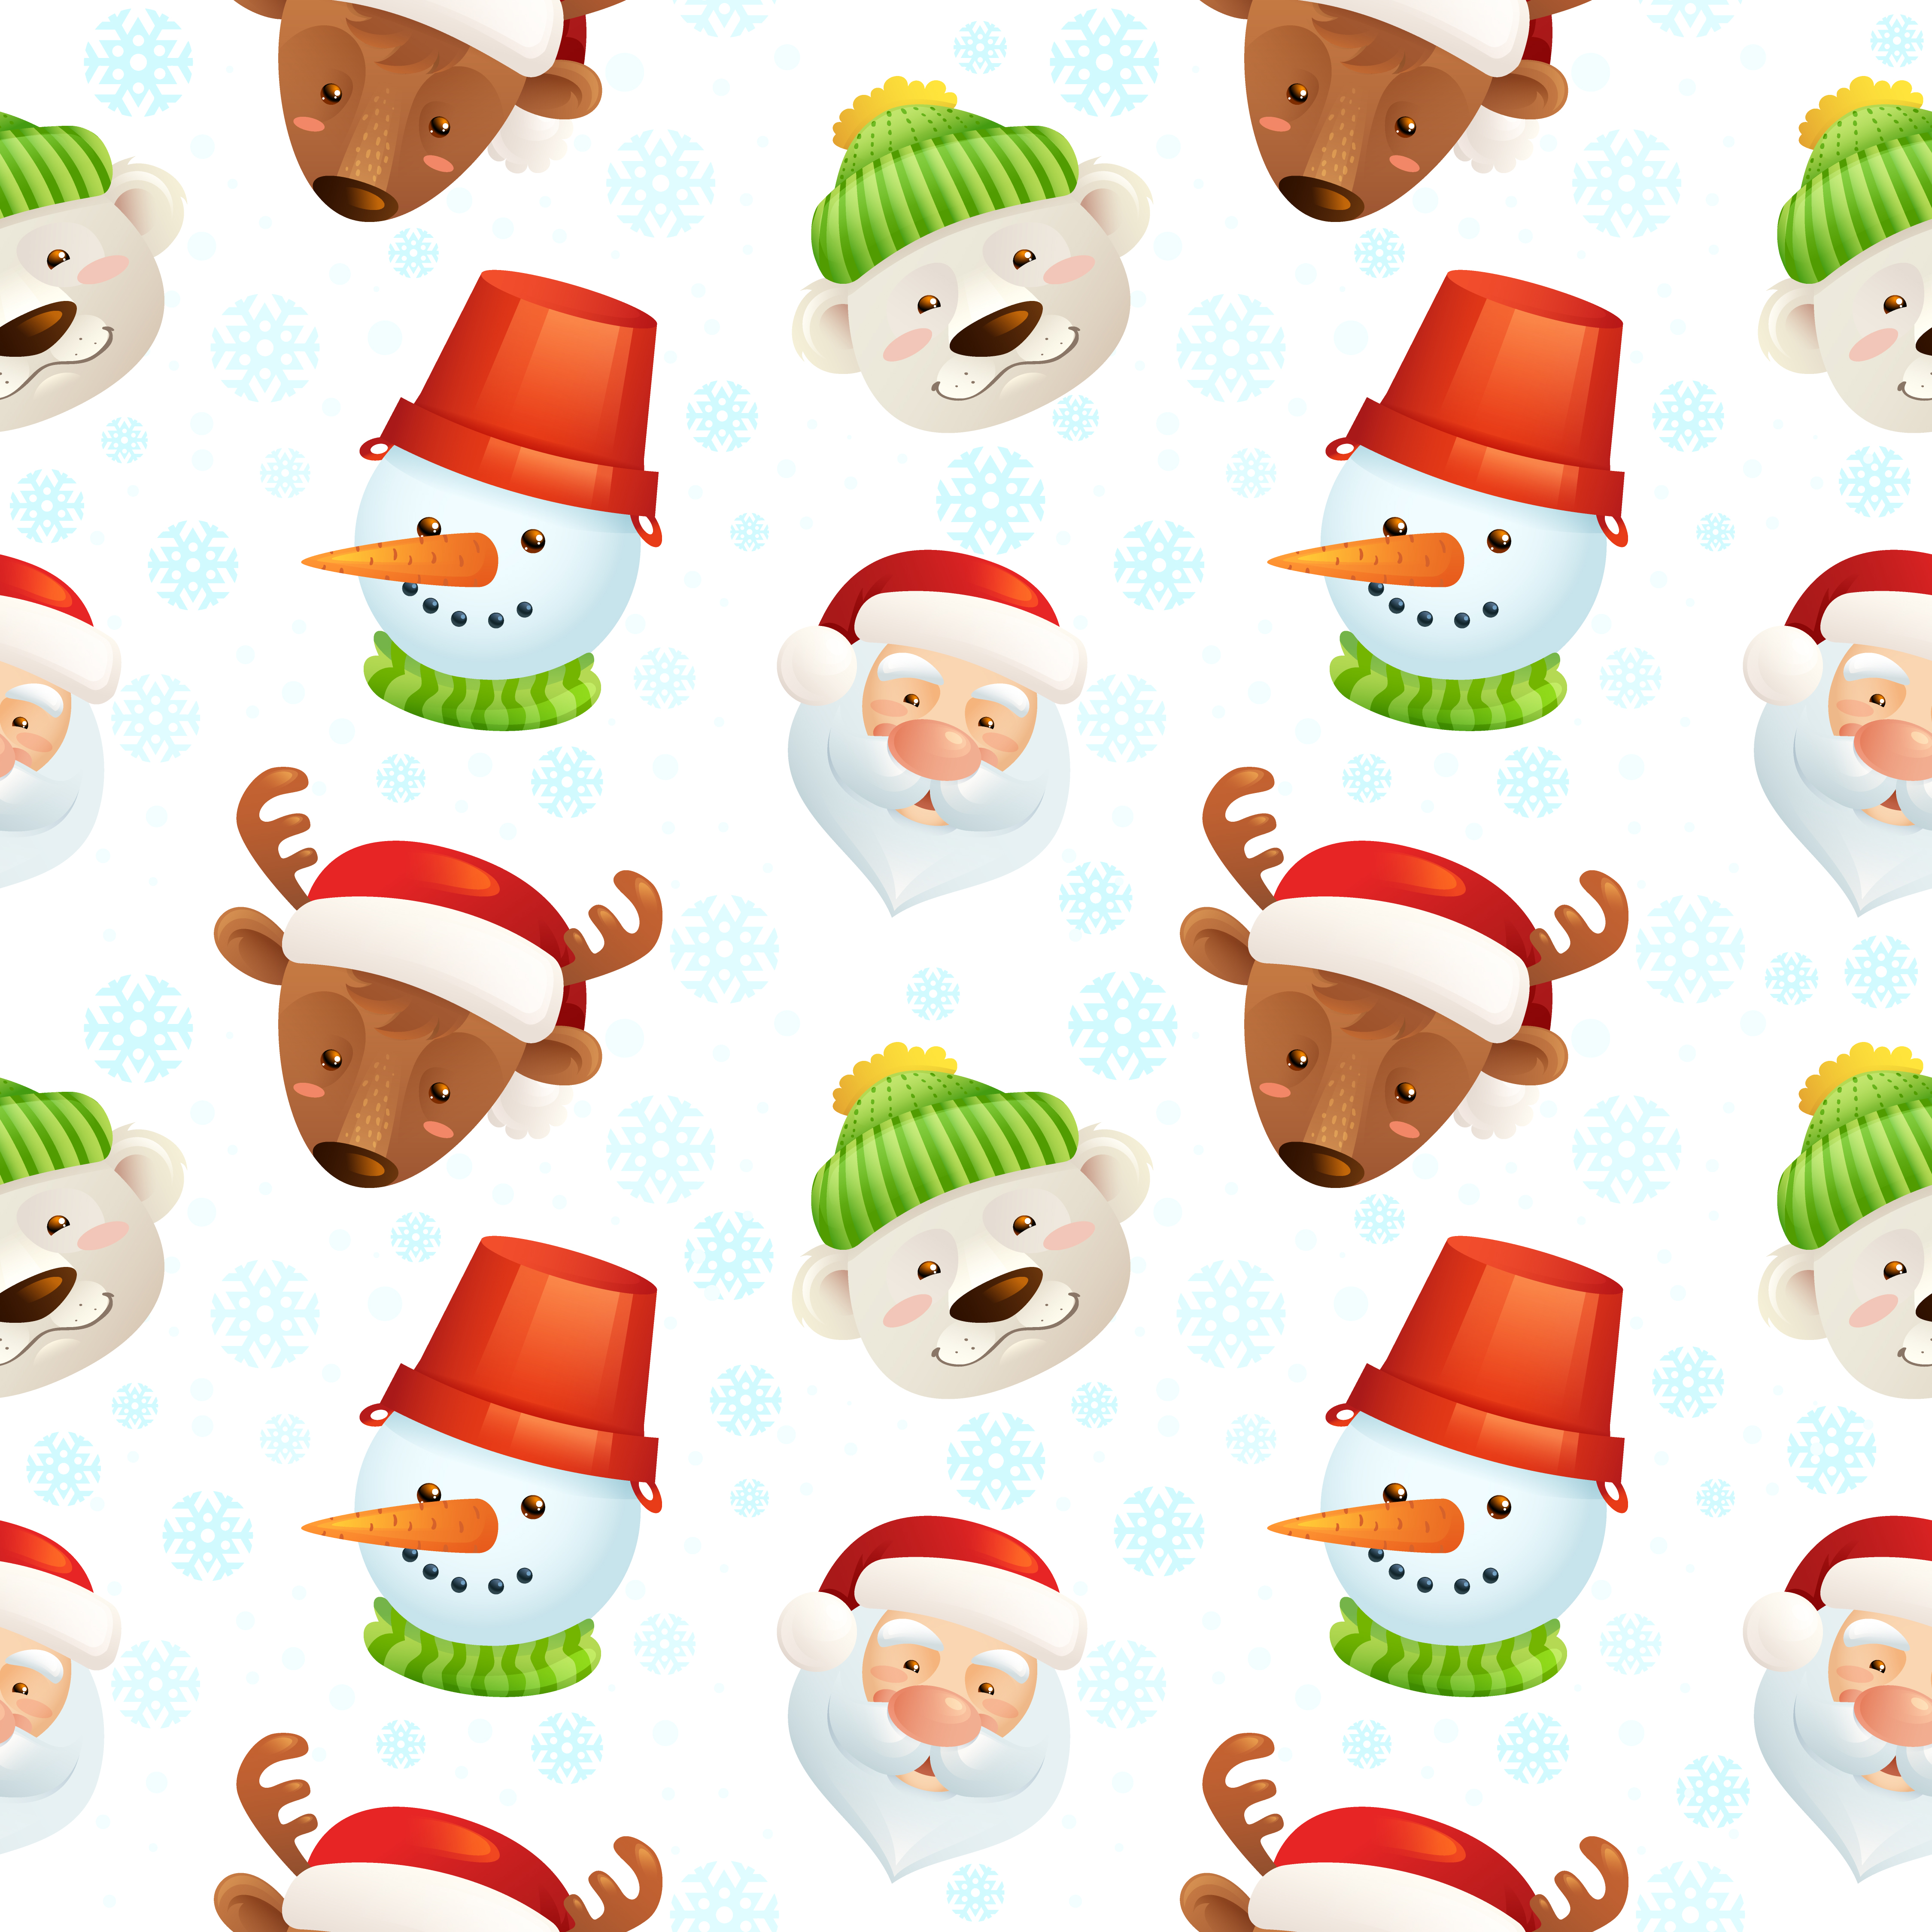 Download Christmas characters seamless pattern - Download Free ...